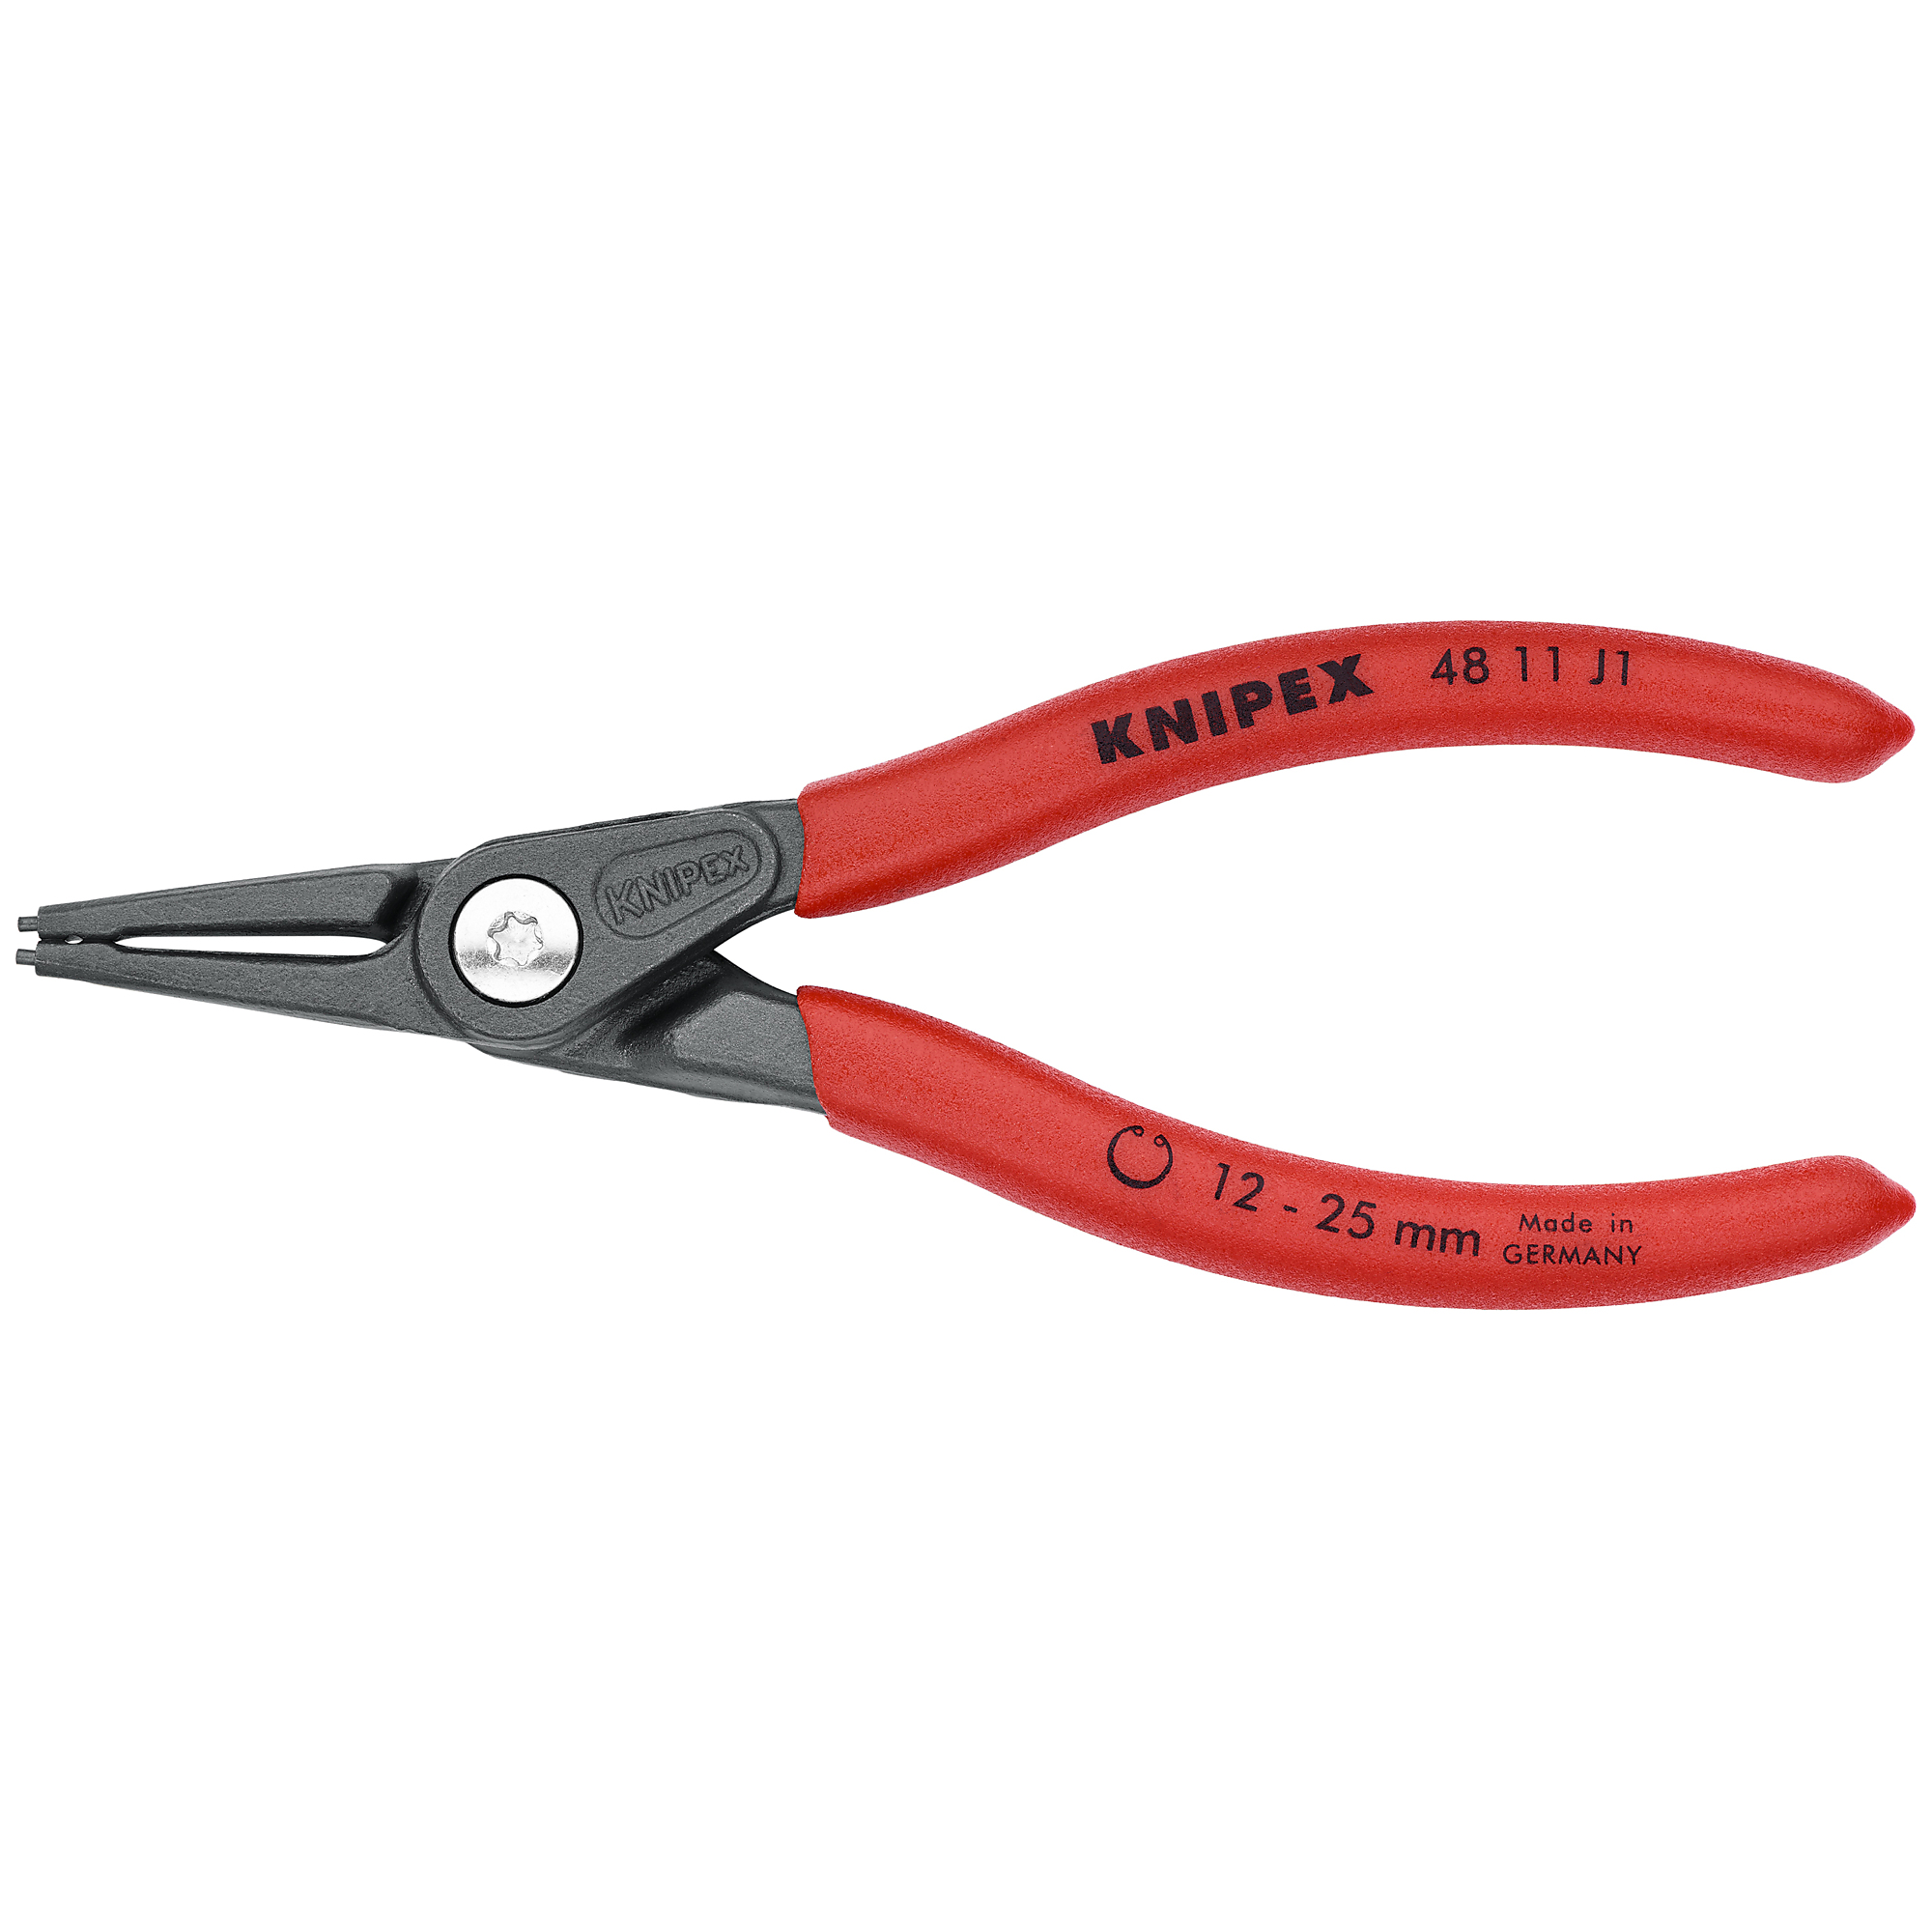 KNIPEX, Int Precision Snap Ring Pliers, 3/64 tip, 5.5Inch, Pieces (qty.) 1 Material Steel, Model 48 11 J1